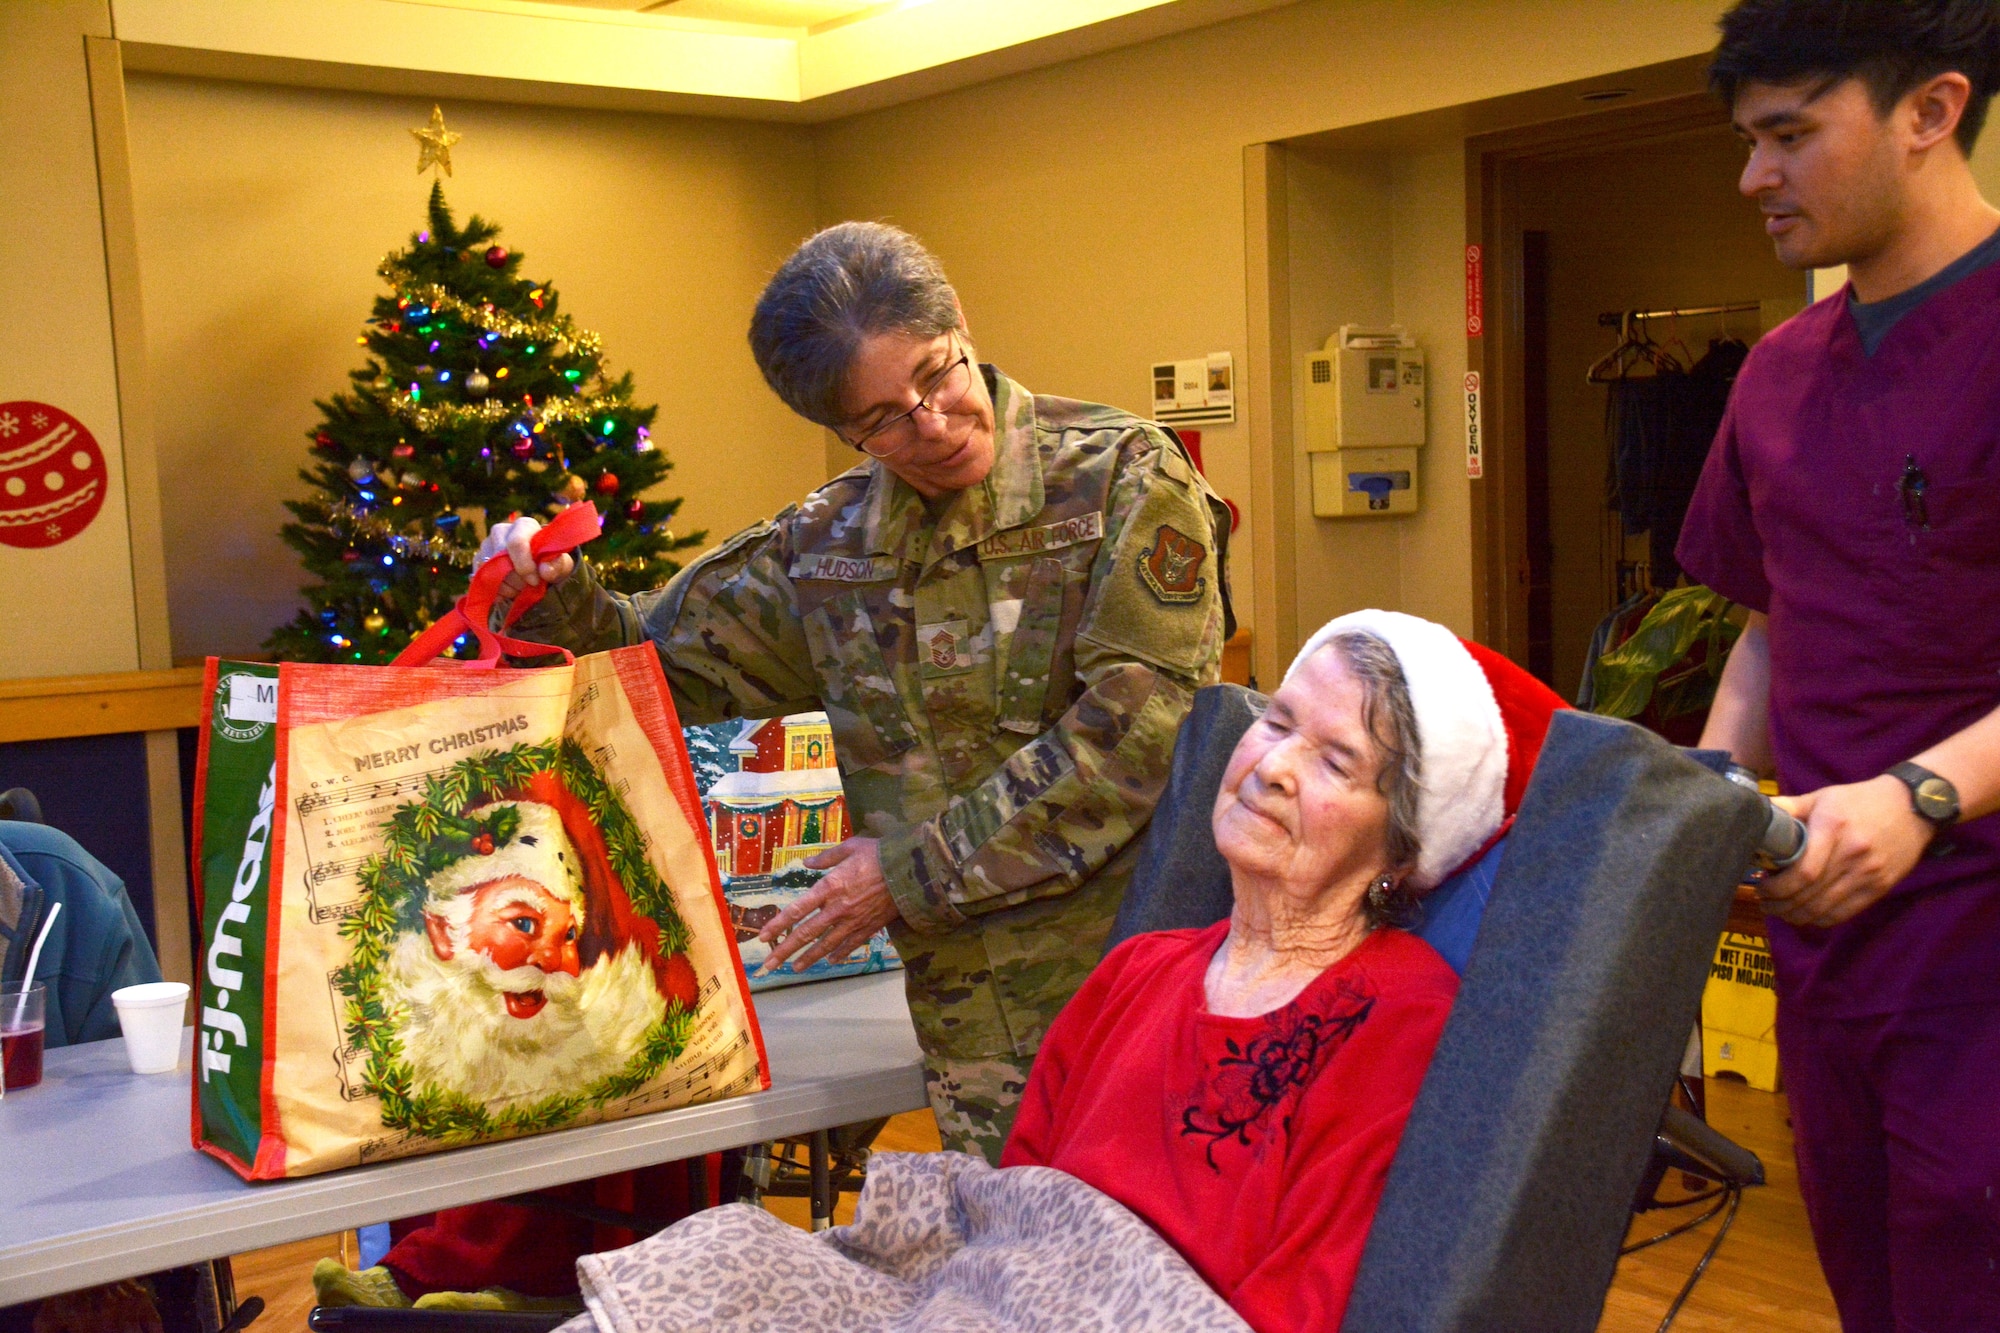 Members of the 507th Air Refueling Wing visited with veterans at the Norman Veteran's Center in Norman, Oklahoma, Dec. 20, 2019. (U.S. Air Force photo by Tech. Sgt. Samantha Mathison)